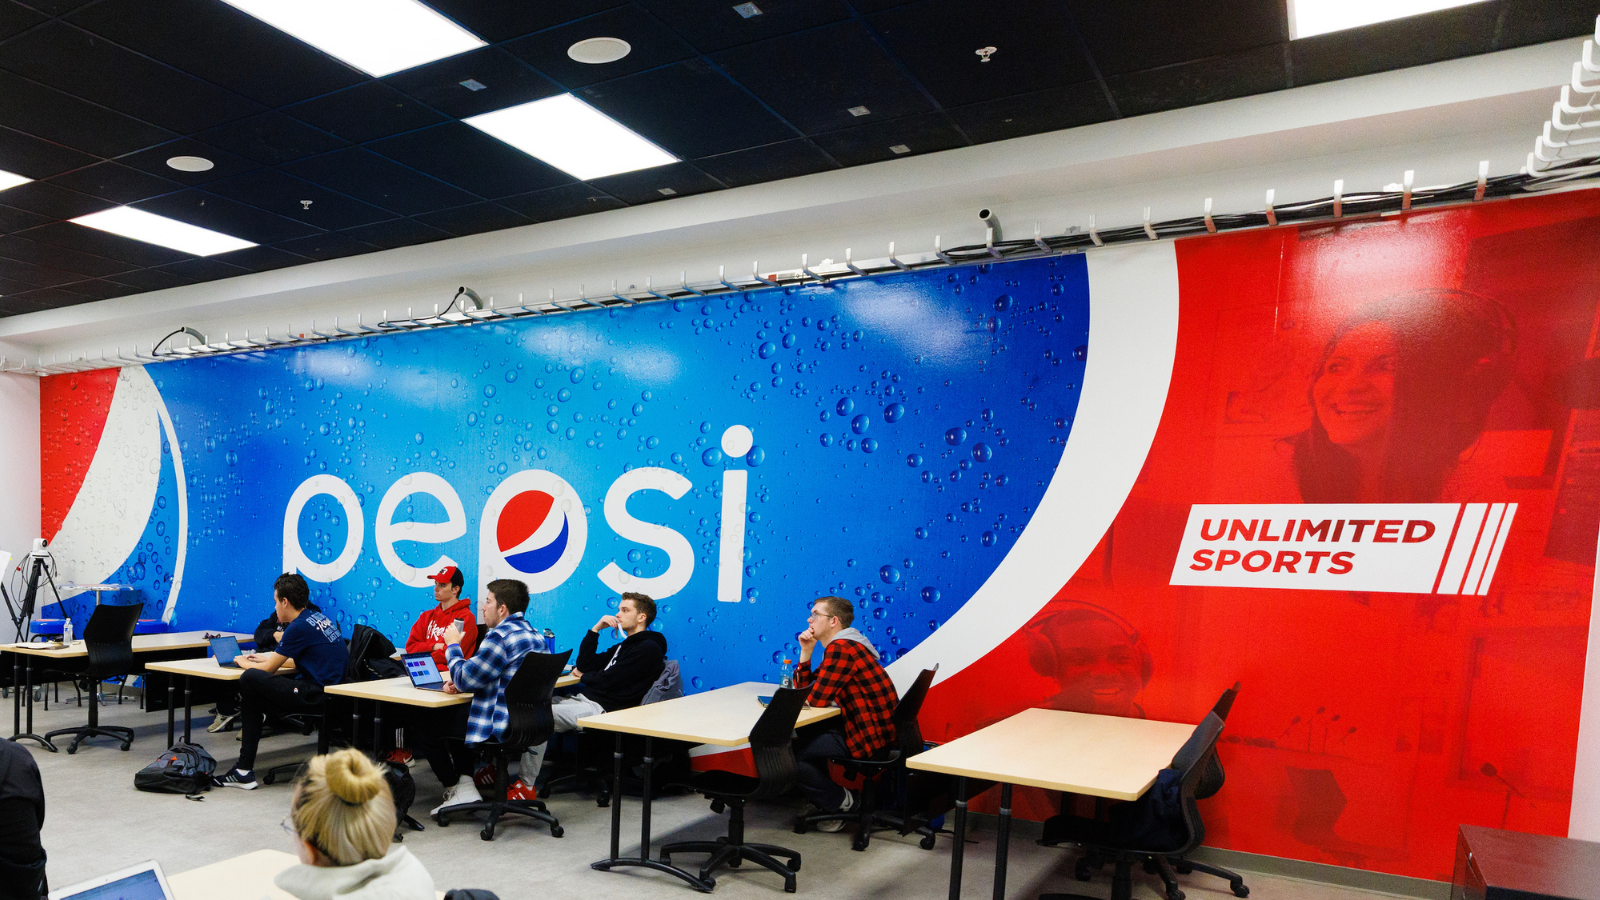 Students in the Pepsi unlimited sports lab